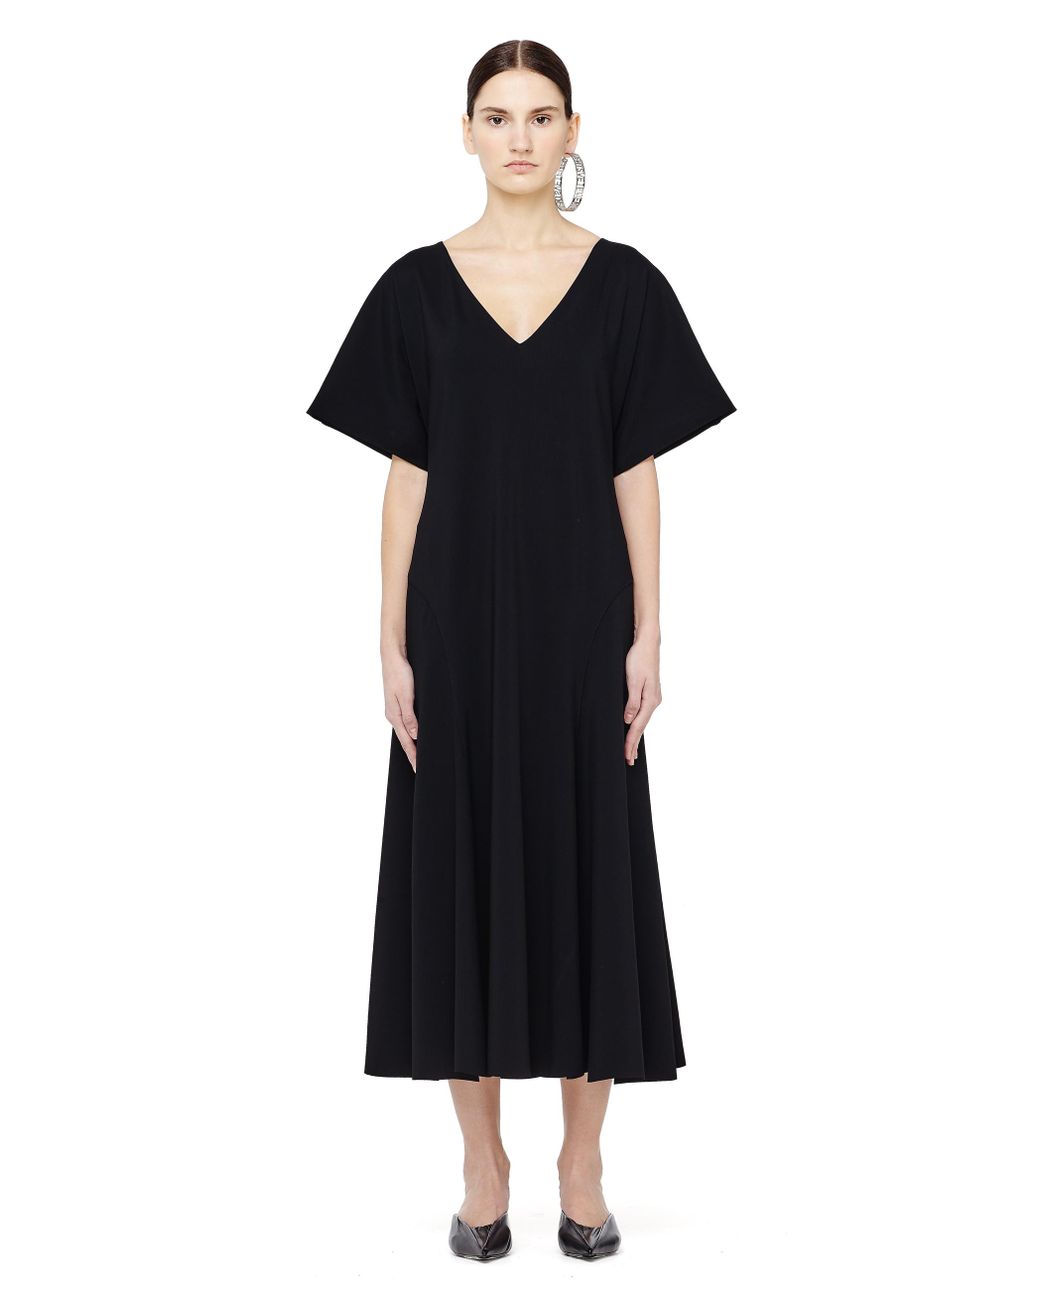 The Row Synthetic Lucid Midi Dress in Black - Lyst